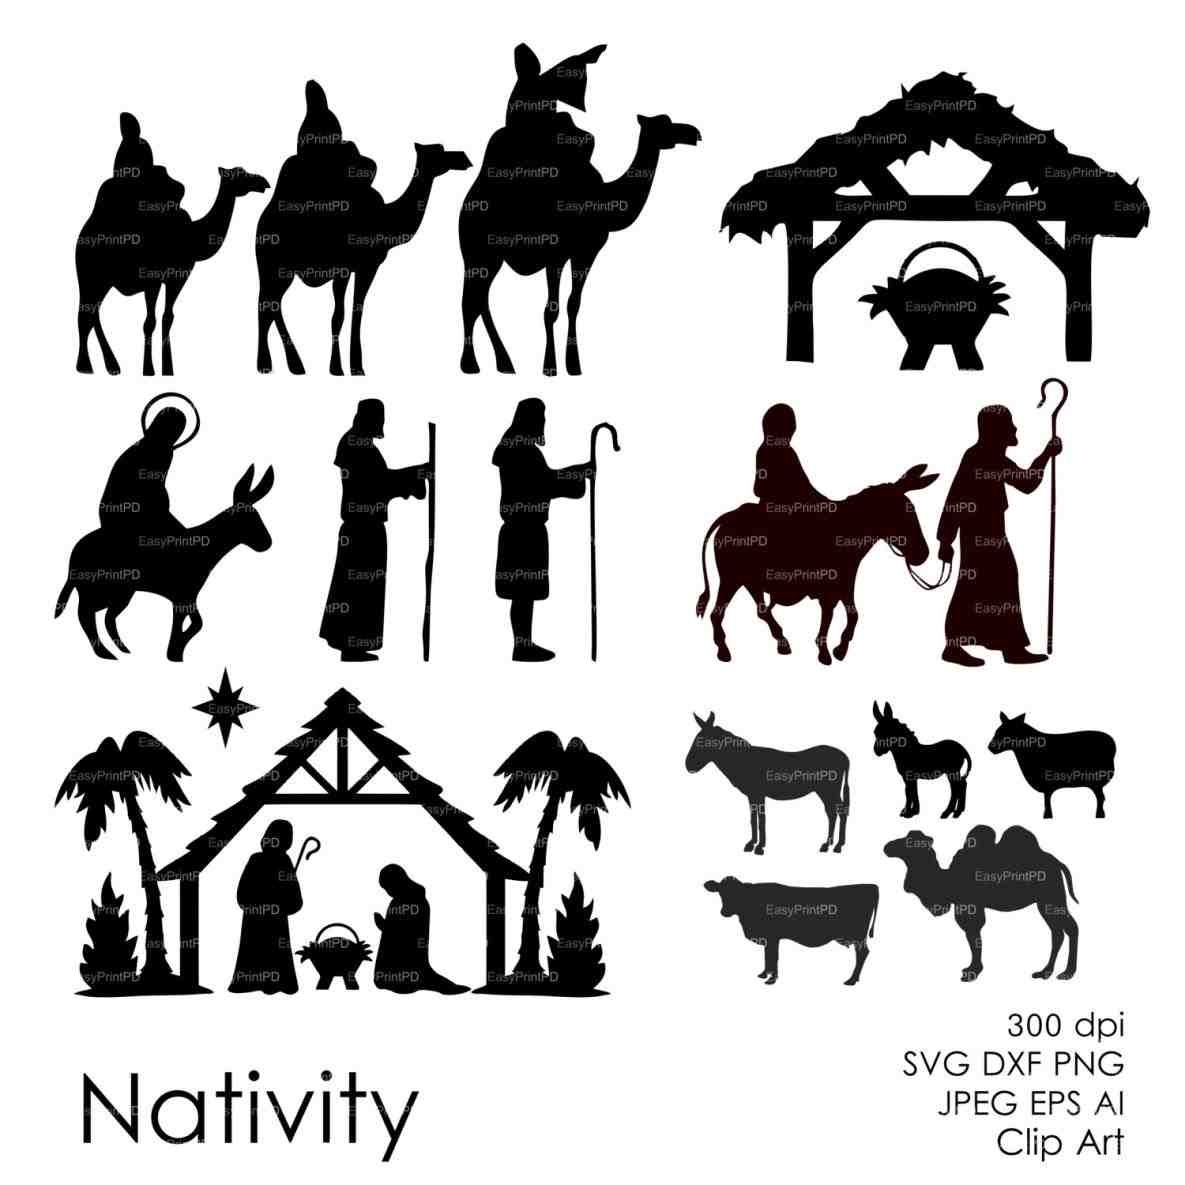 Nativity Silhouette Patterns Download | Free Download Best Nativity - Free Printable Nativity Silhouette